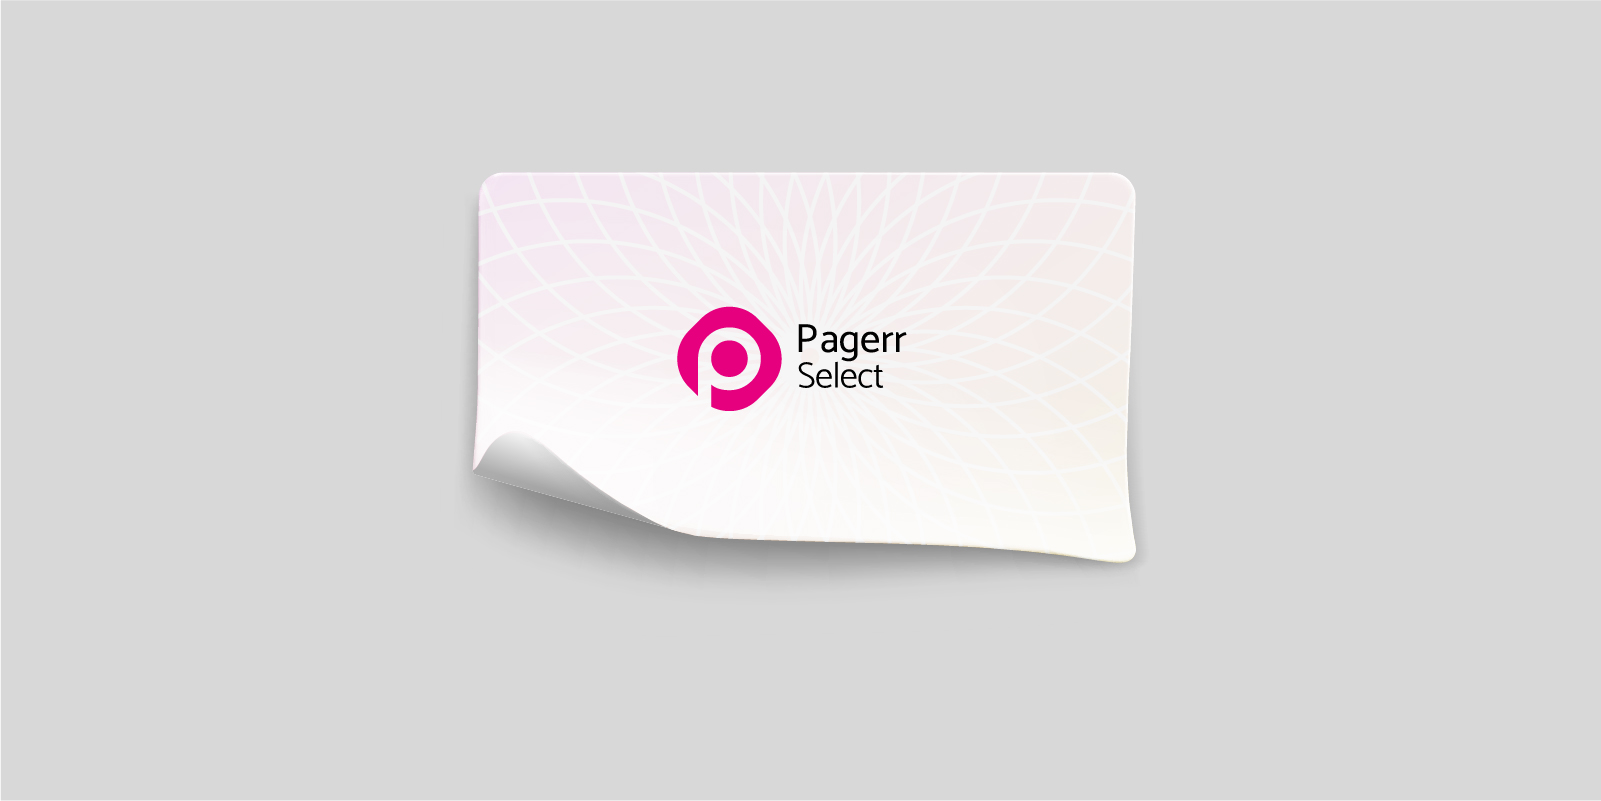 Sheet stickers in Adelaide - Print with Pagerr